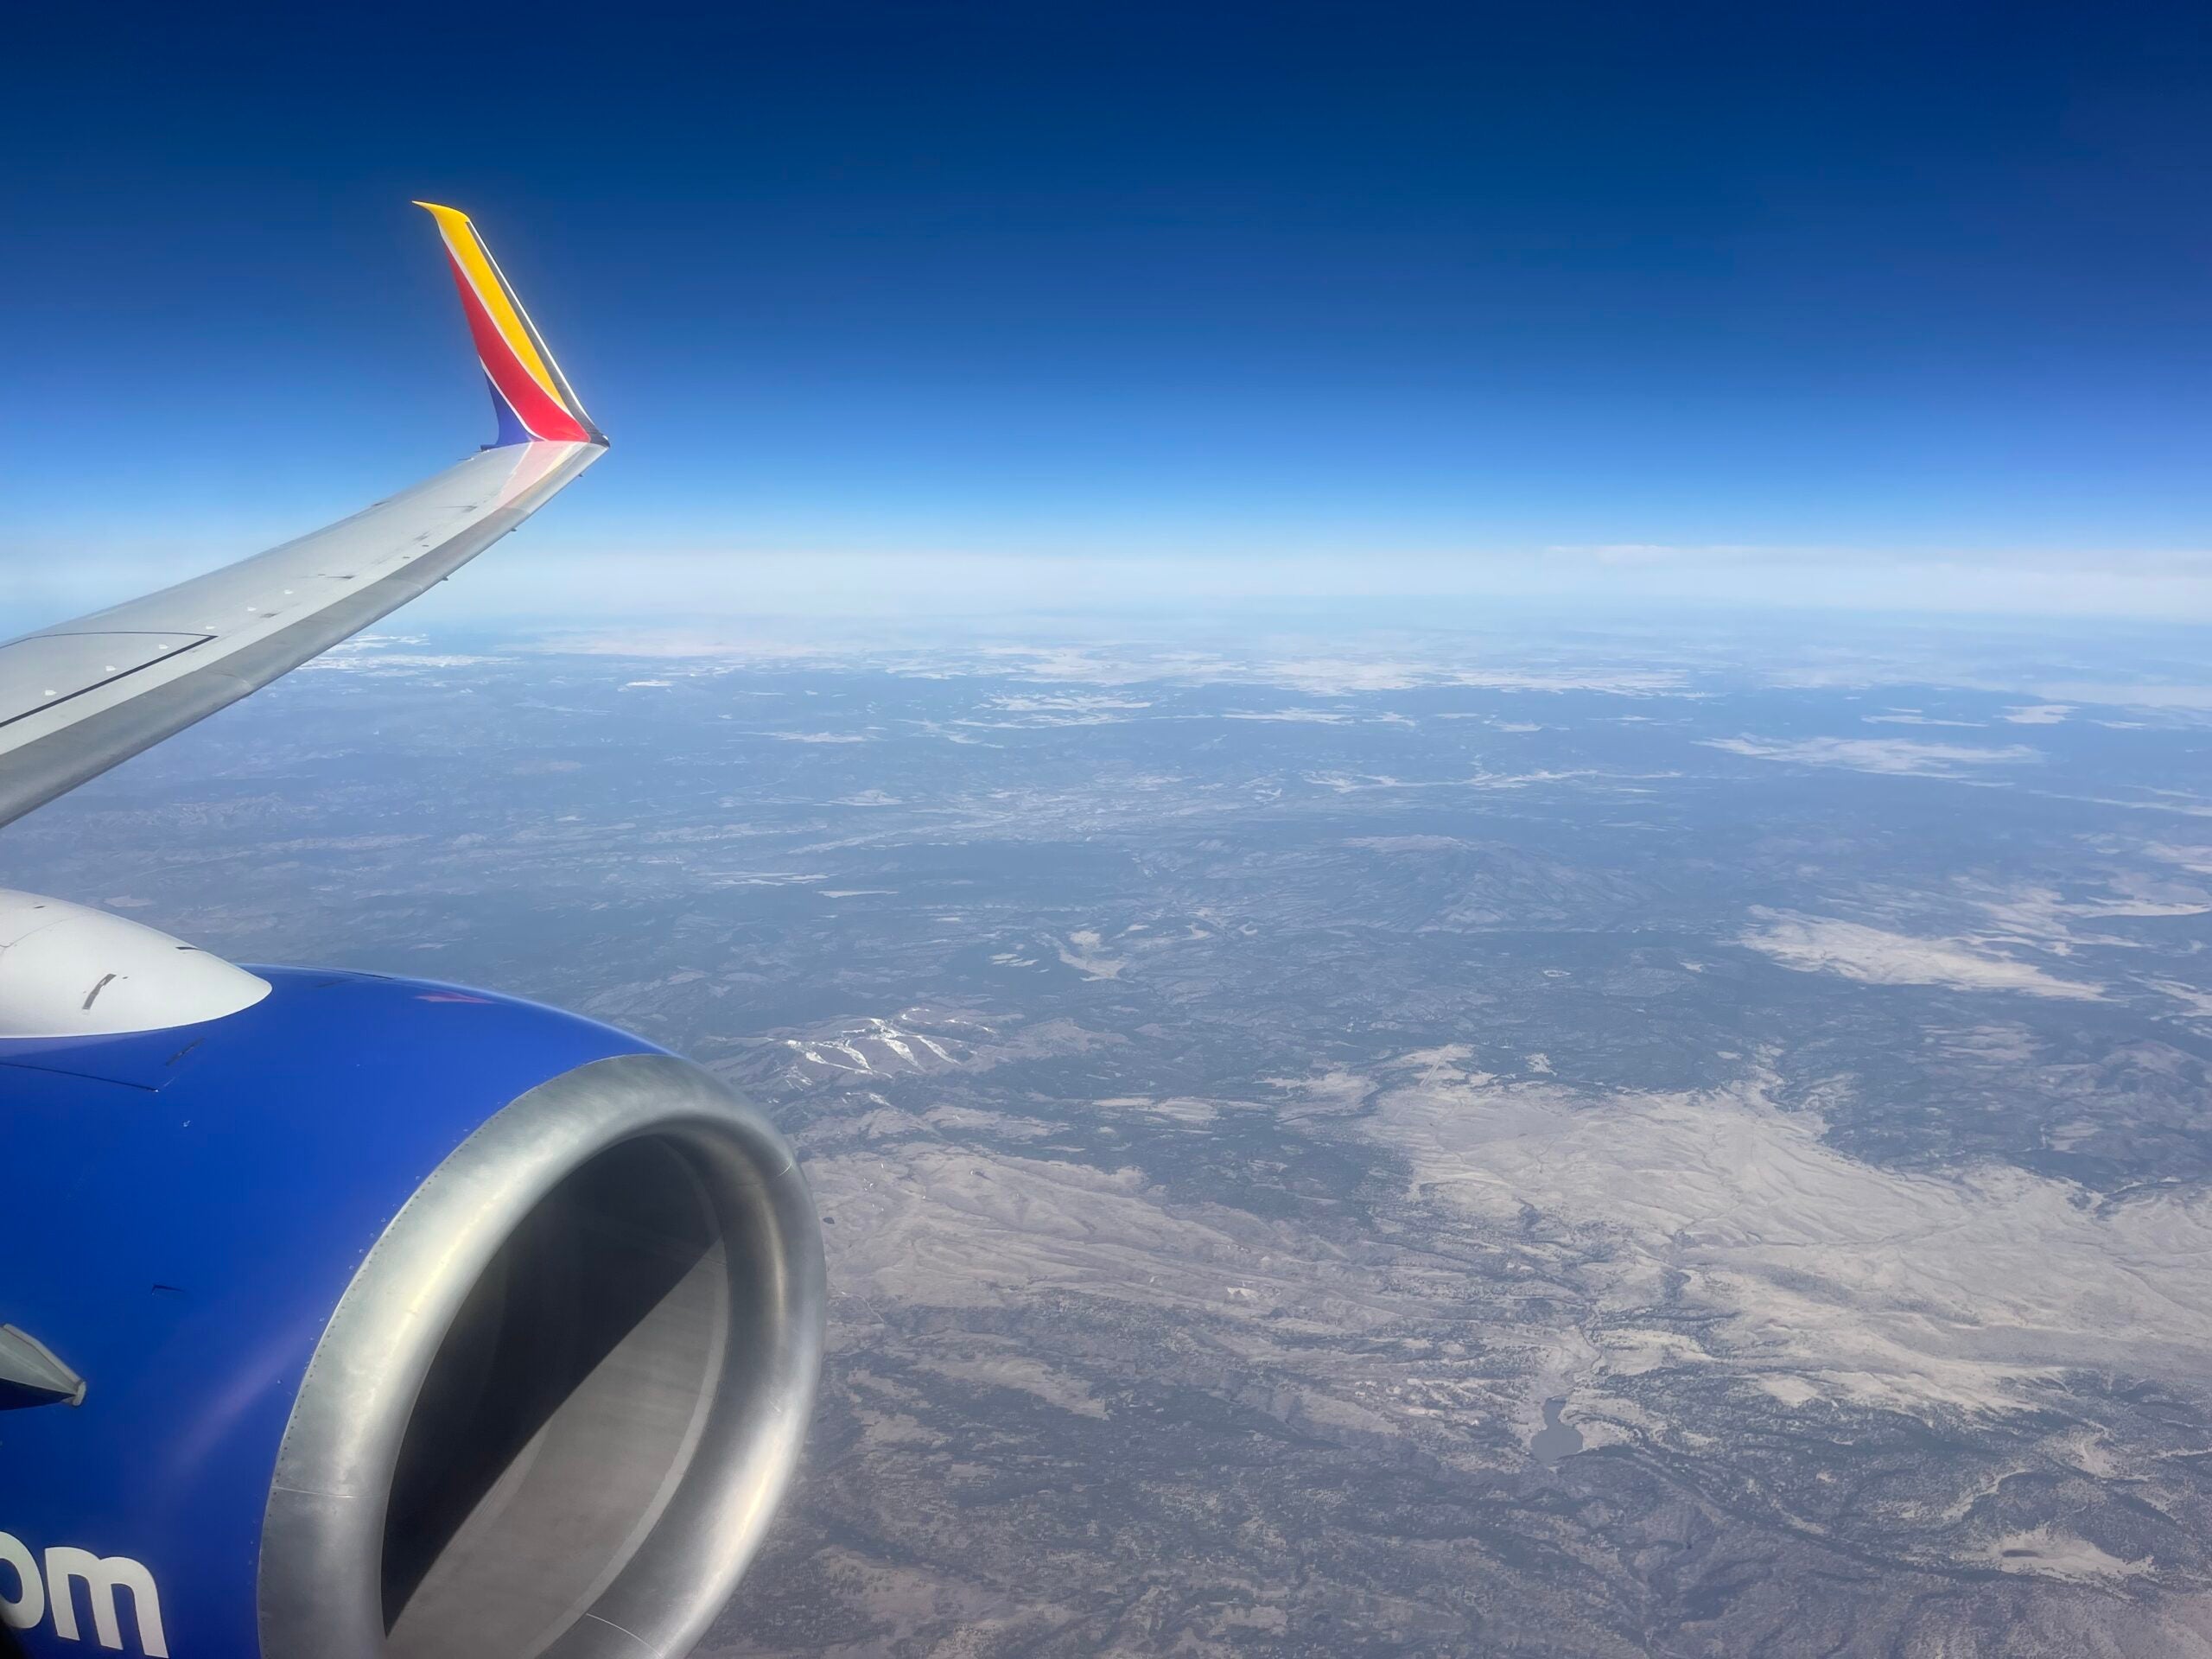 Looking out the window of a Southwest Airlines plane, with parts of the wing and engine seen above the landscape